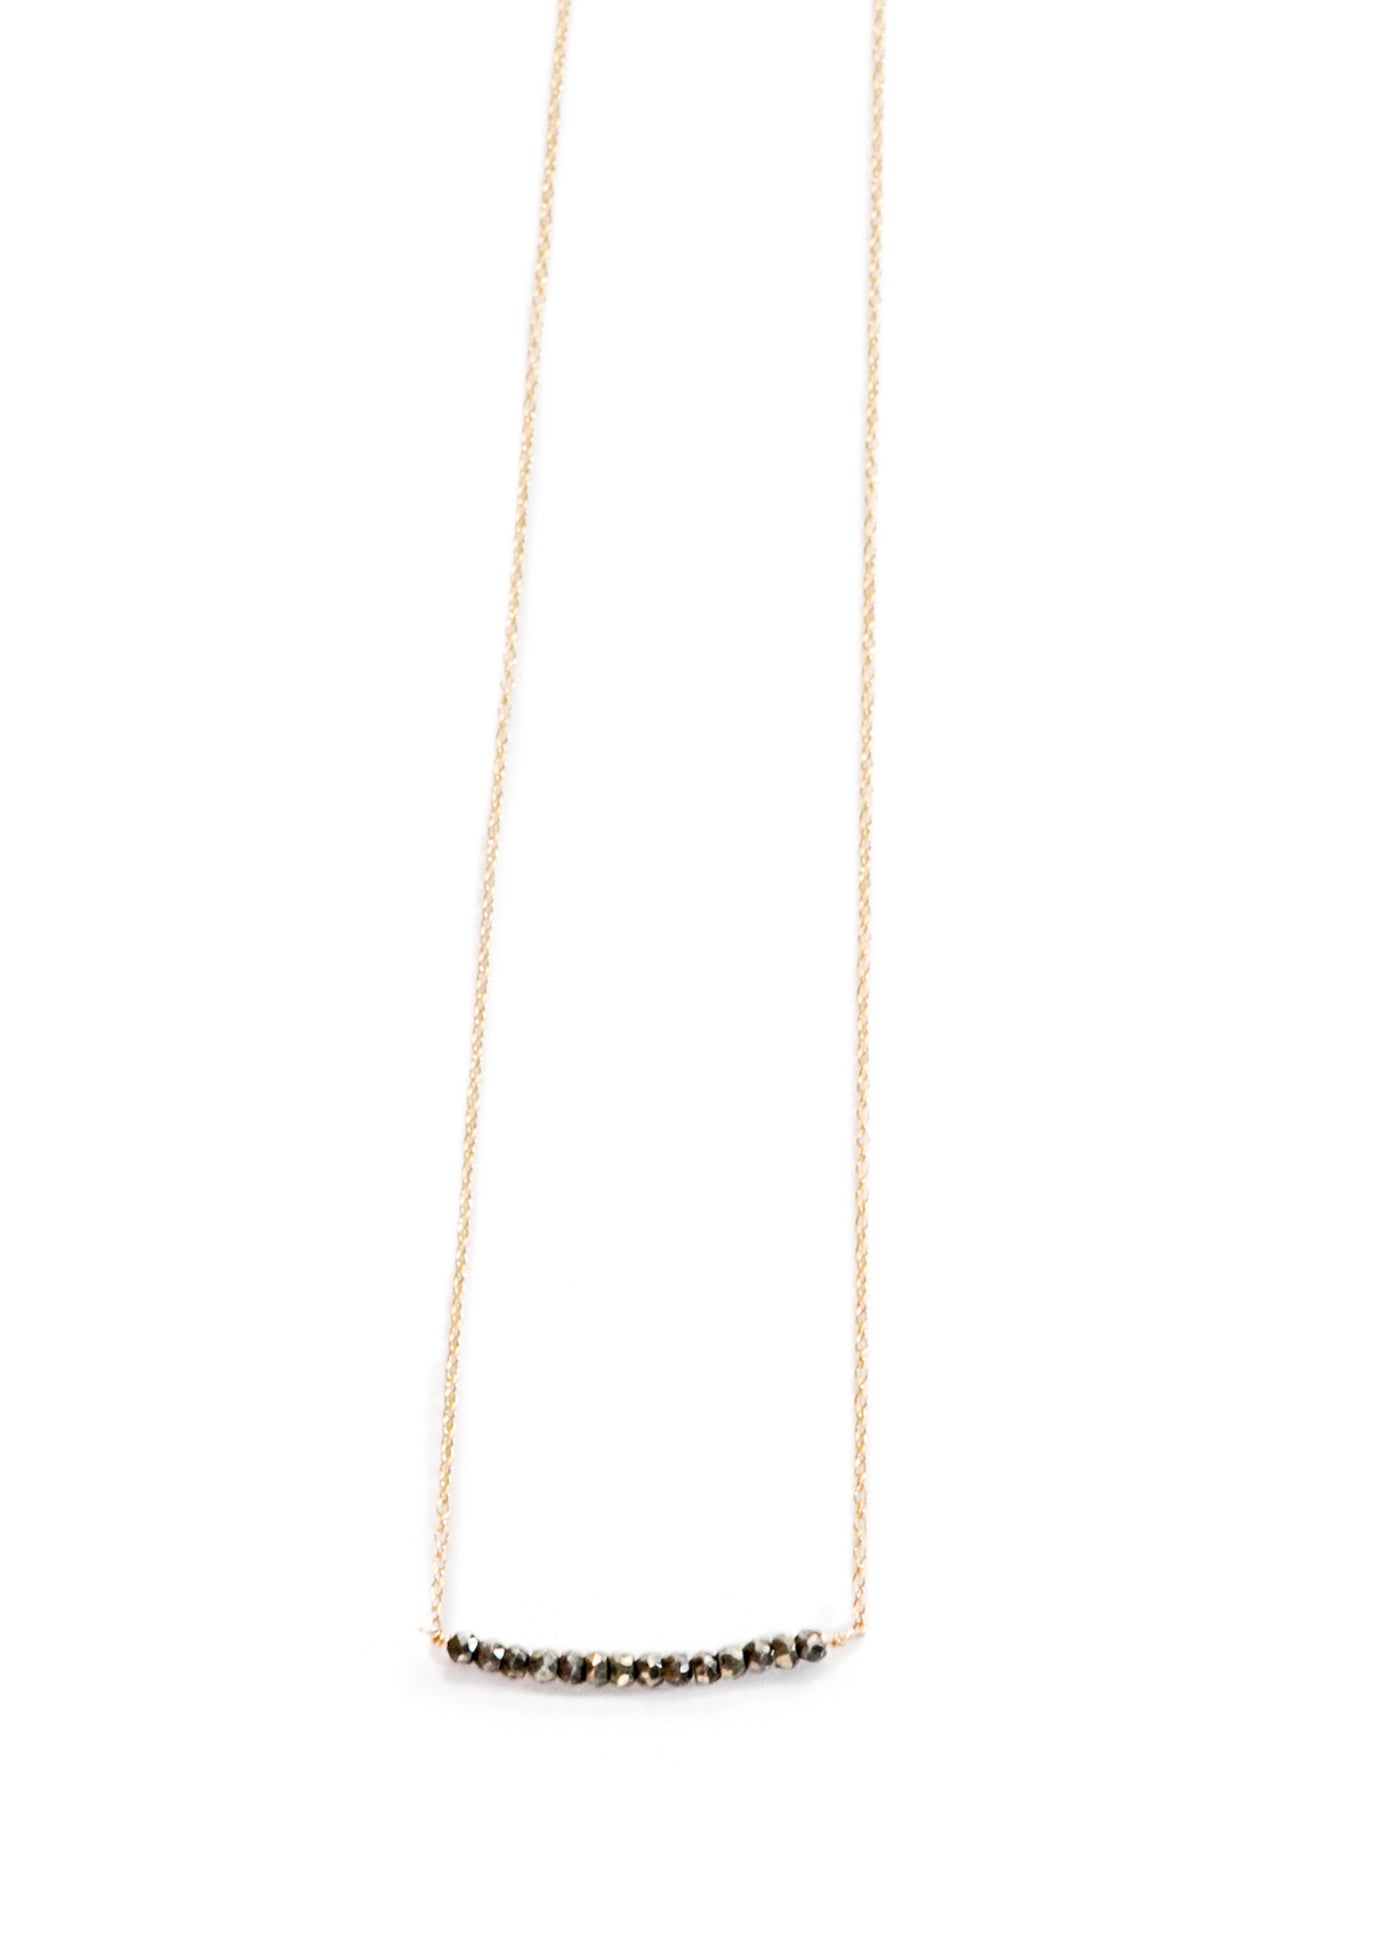 Michelle Bar Necklace in Pyrite